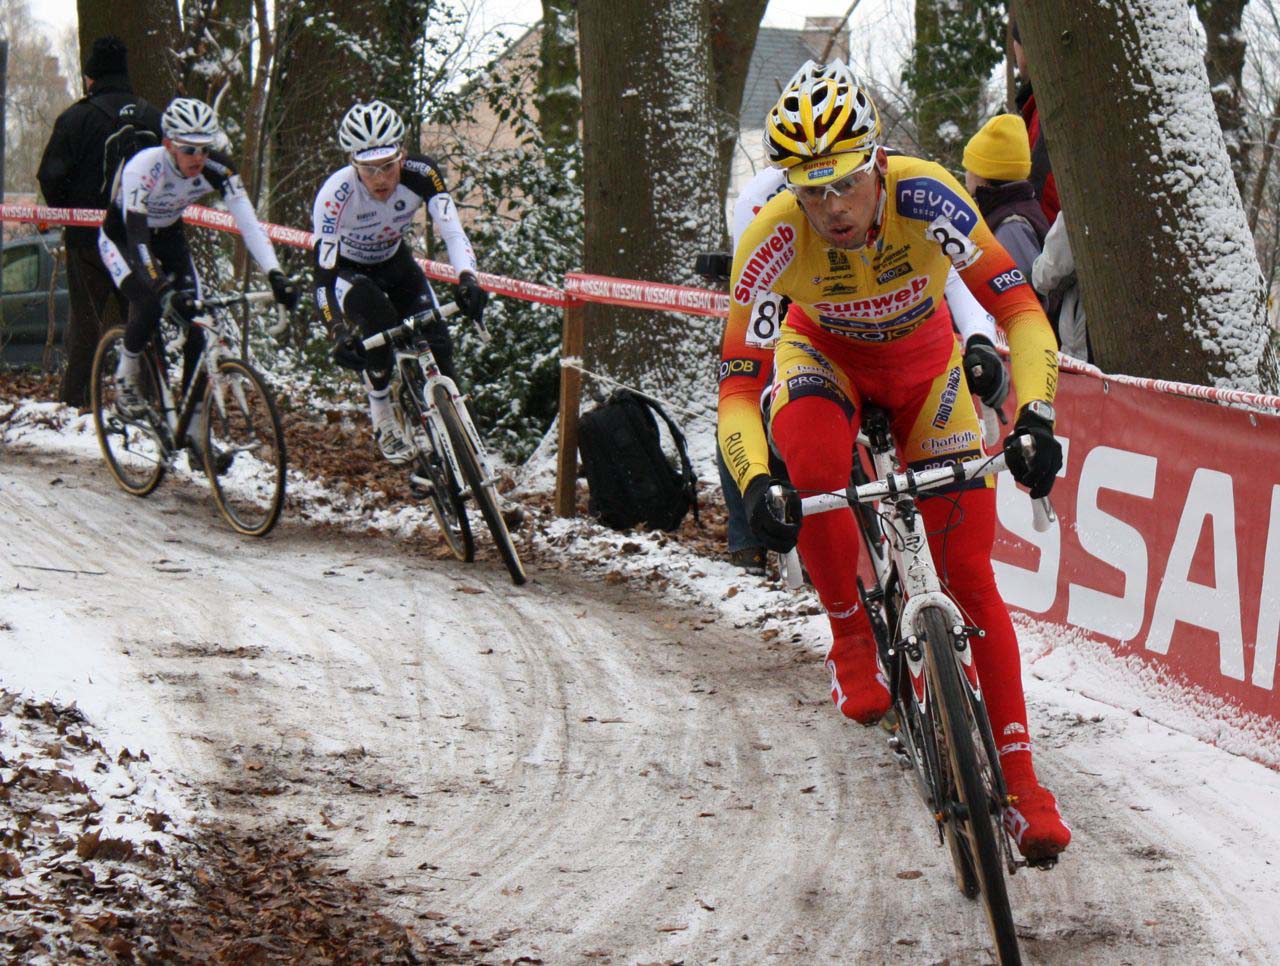 Sven Vanthourenhout had an early lead but crashed hard and left the race. ? Dan Seaton